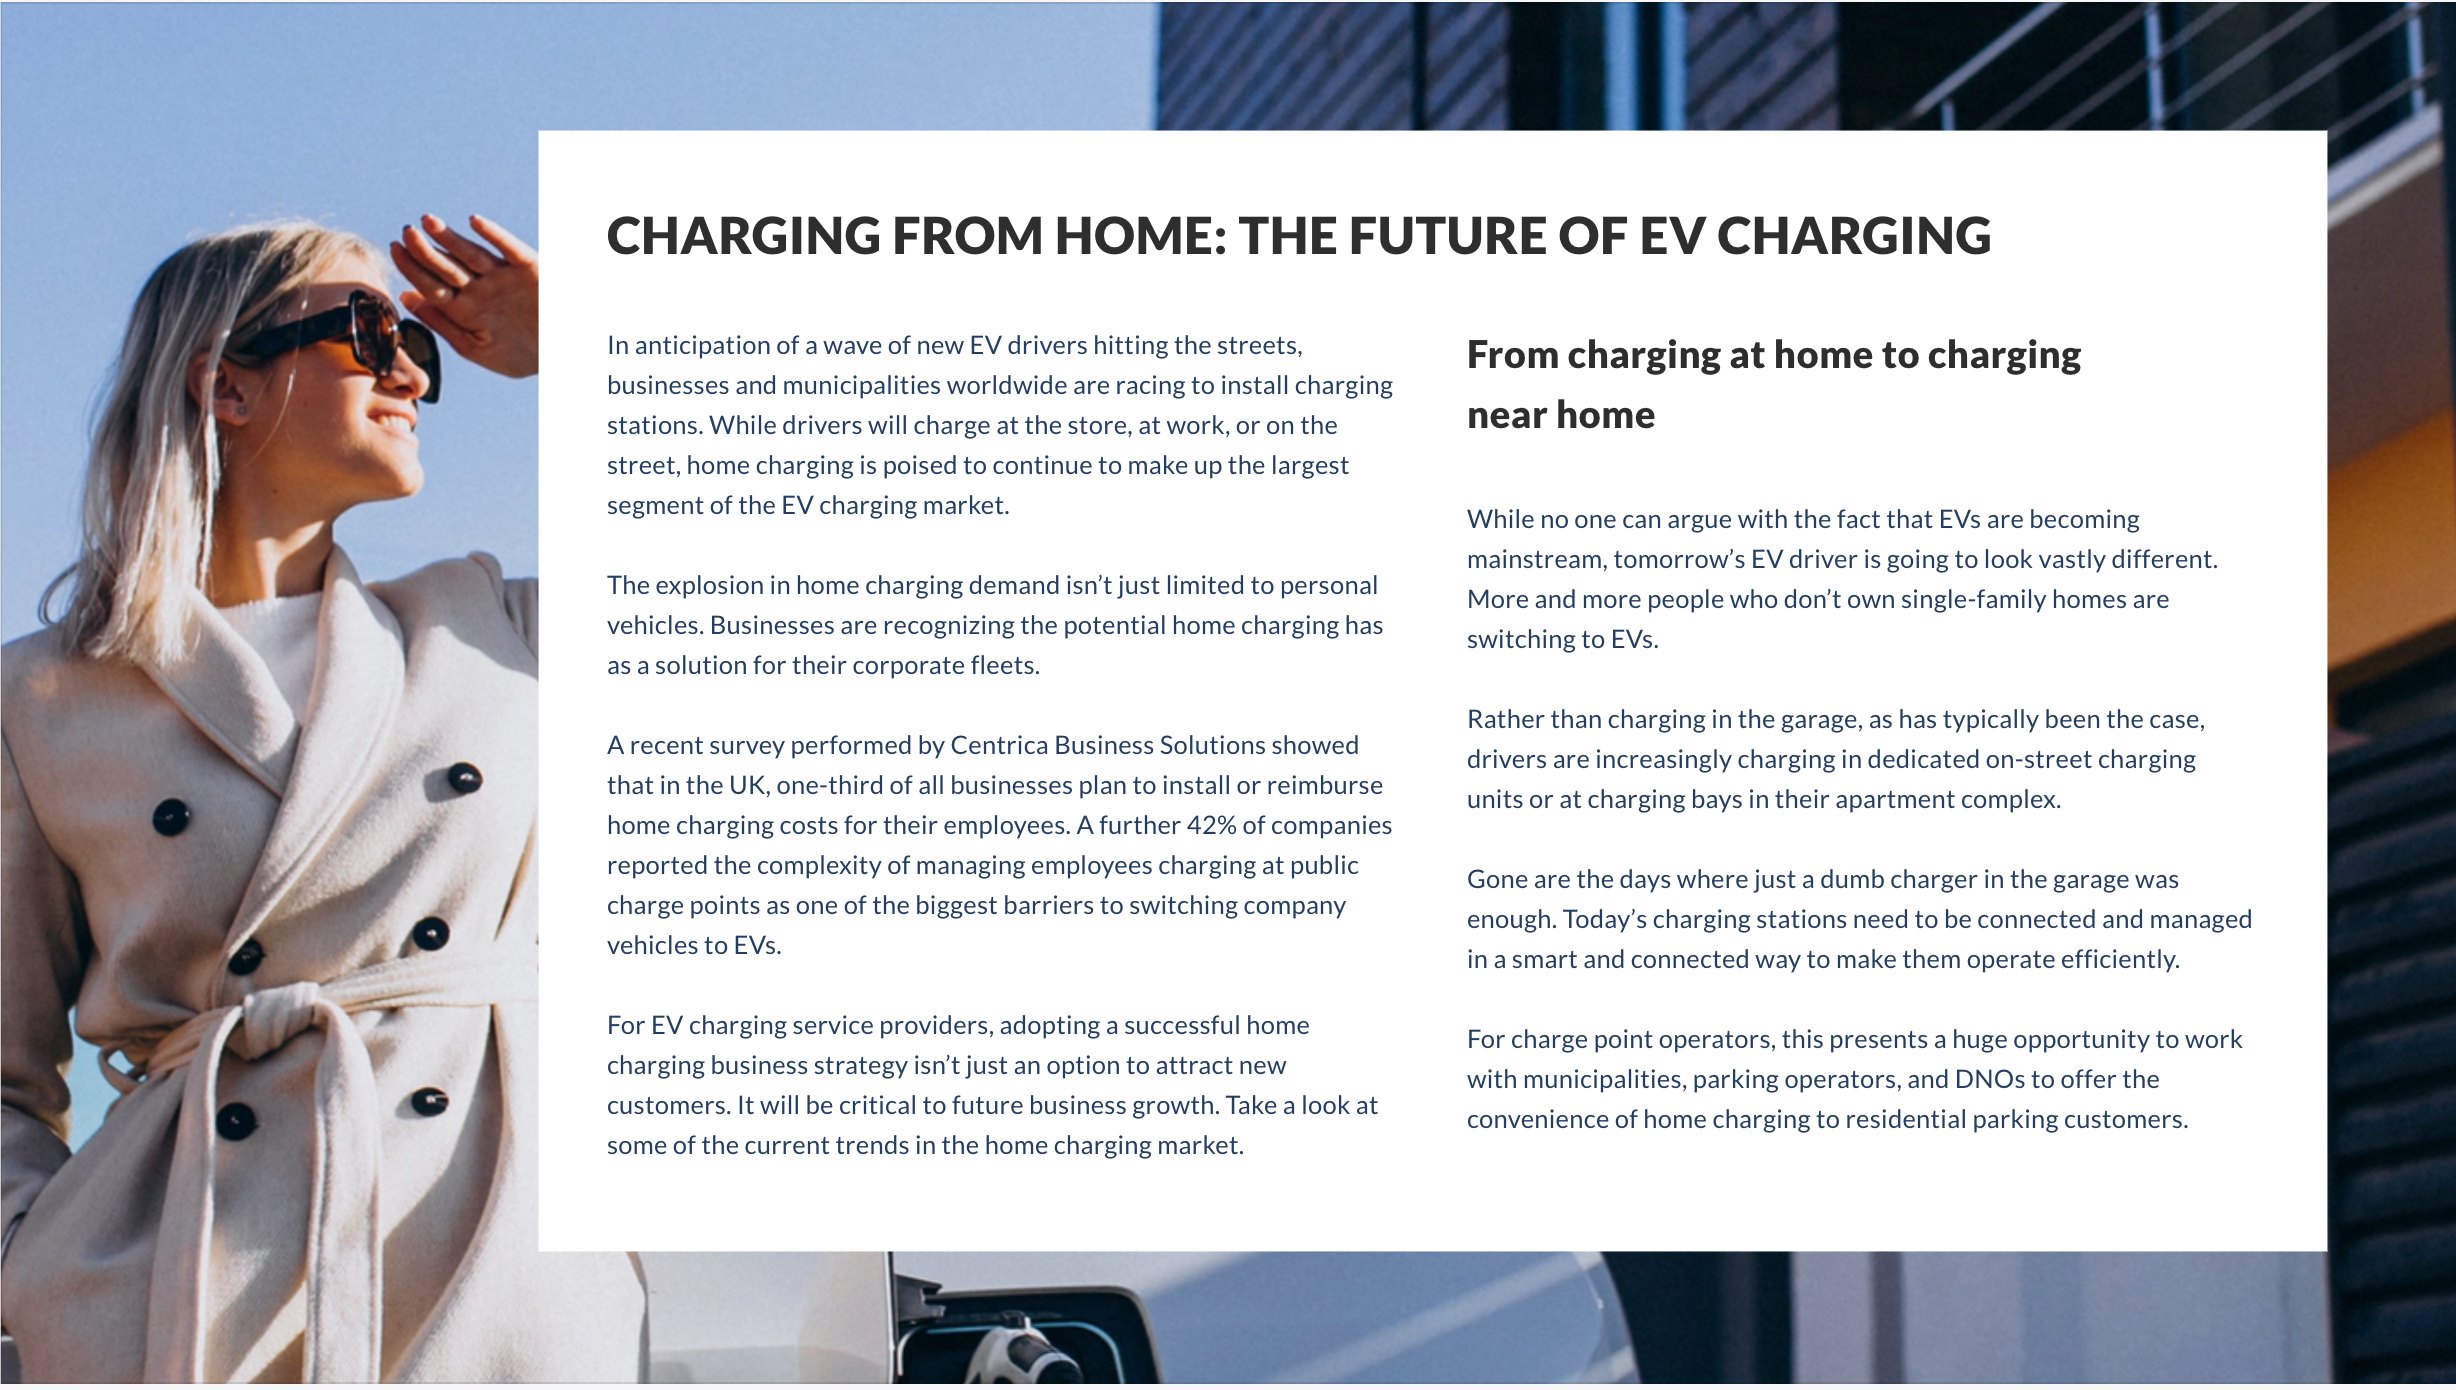 Building A Successful Home Charging Business Model - For a full guide to the home charging market, establishing your home charging business model, and key tools for success, click here to download our e-book.